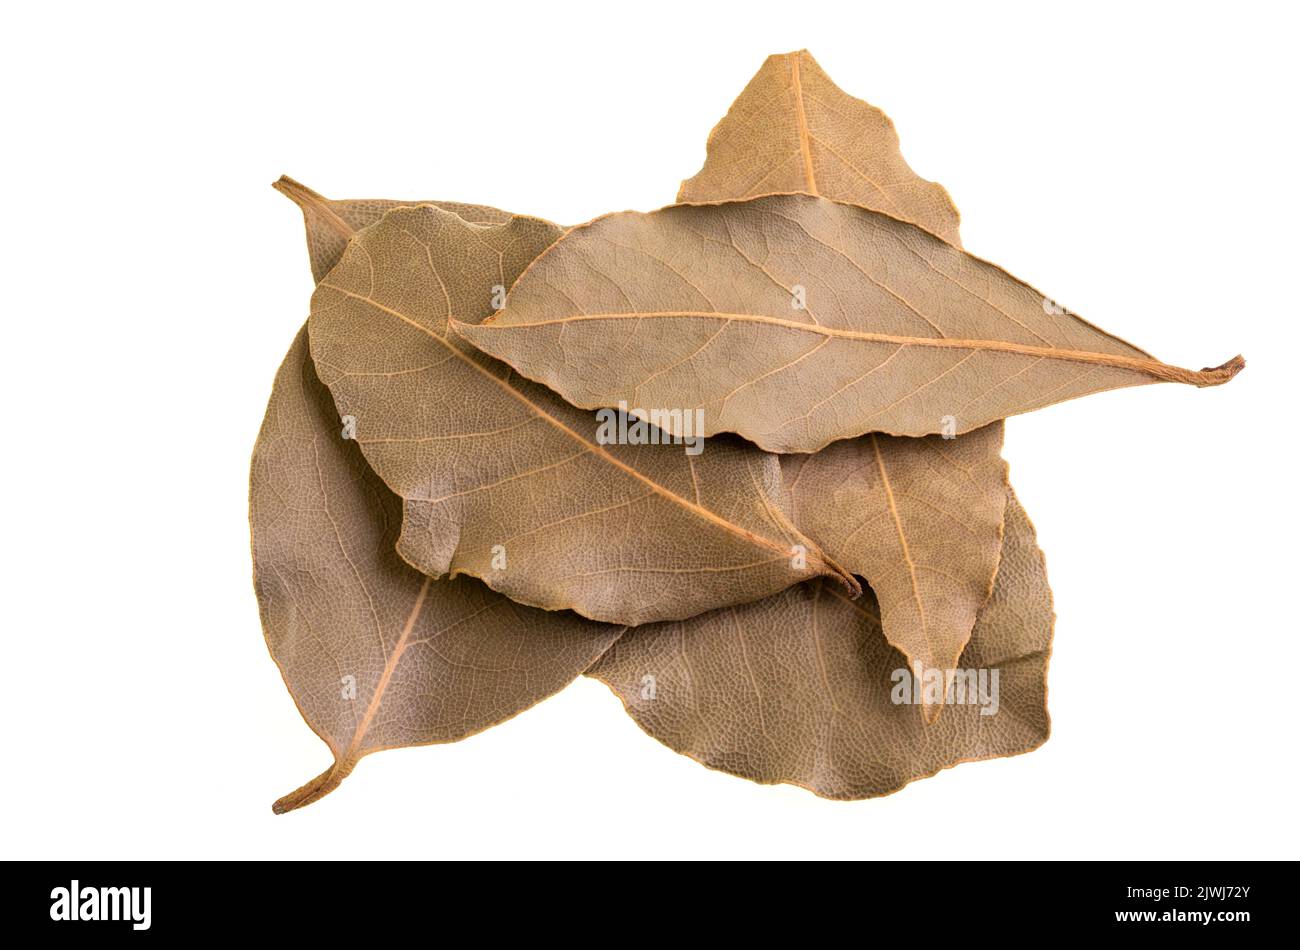 Bay leaves are a fragrant leaf from the laurel tree, Laurus nobilis, commonly used in cooking around the world. Stock Photo